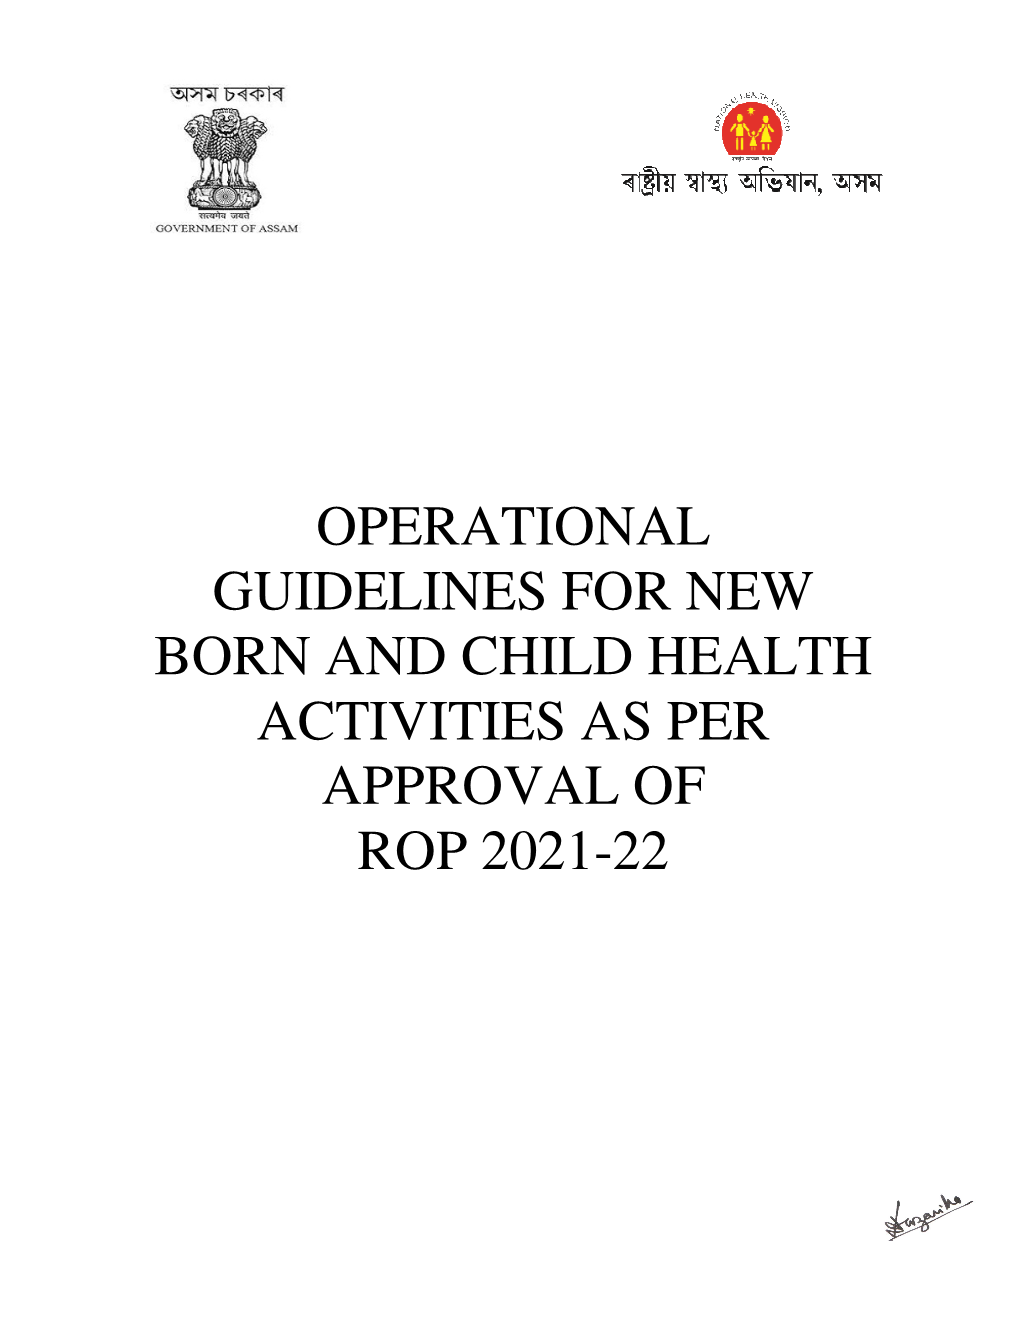 District Rop/ Operational Guideline for Child Health Activities 2021-22